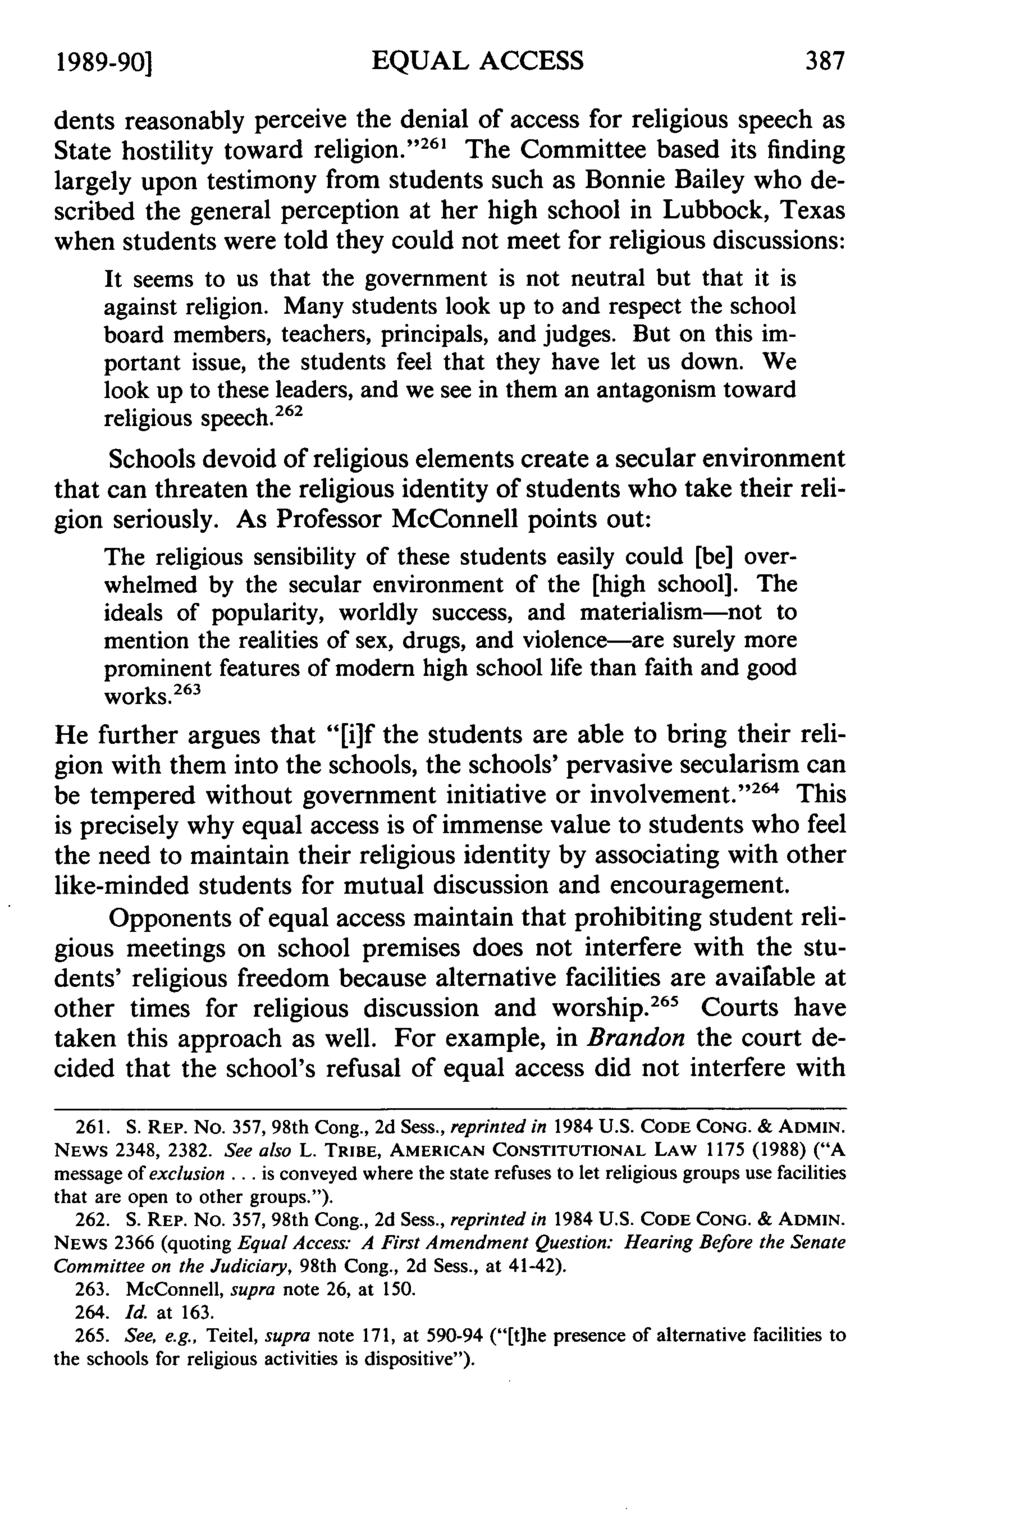 1989-90] EQUAL ACCESS dents reasonably perceive the denial of access for religious speech as State hostility toward religion.